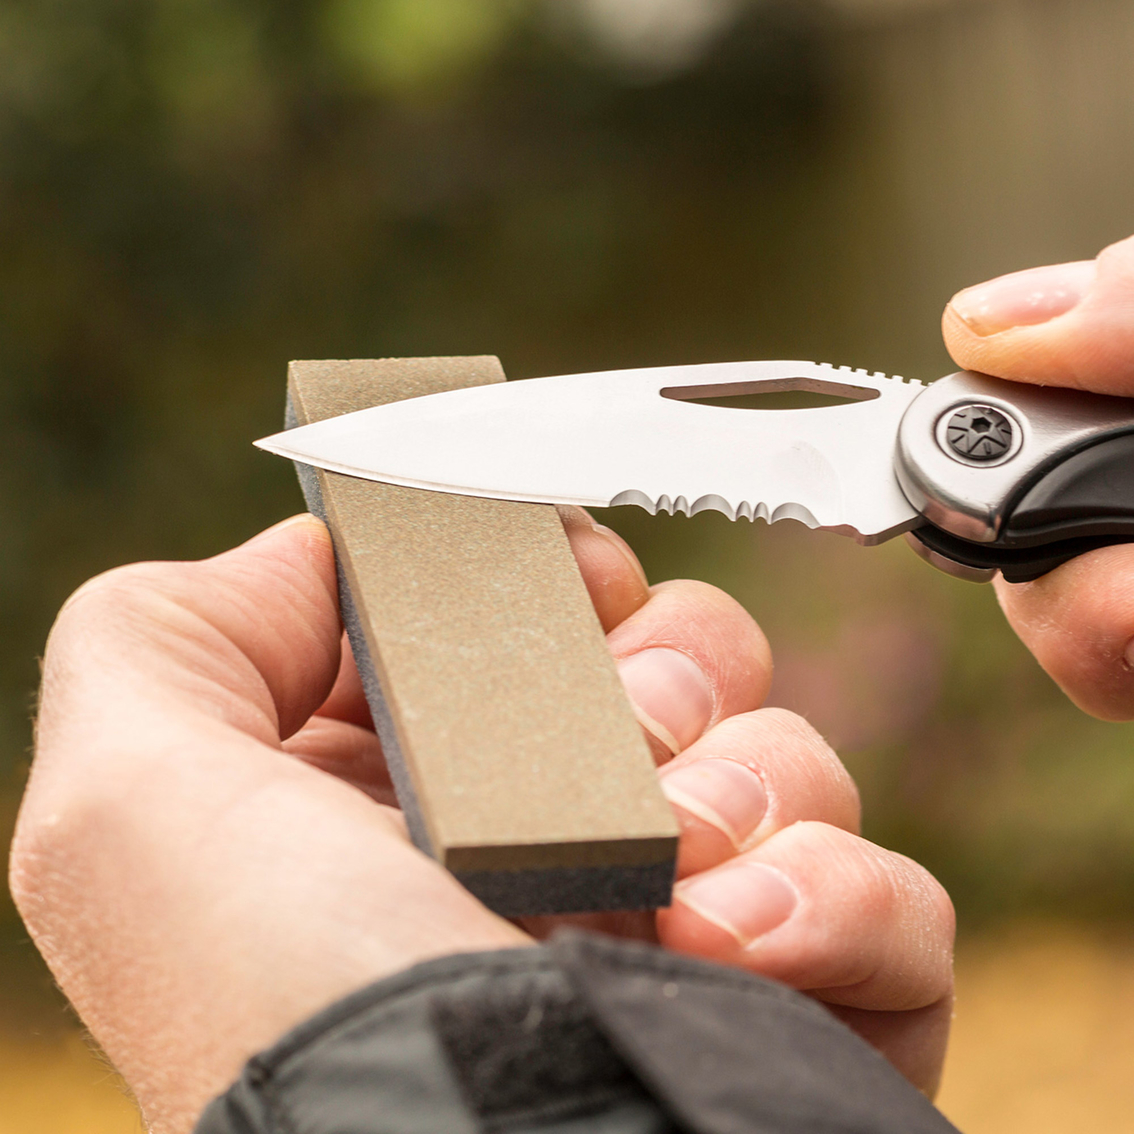 Smith's Adjustable Knife Sharpener In-depth Review: Our Testing